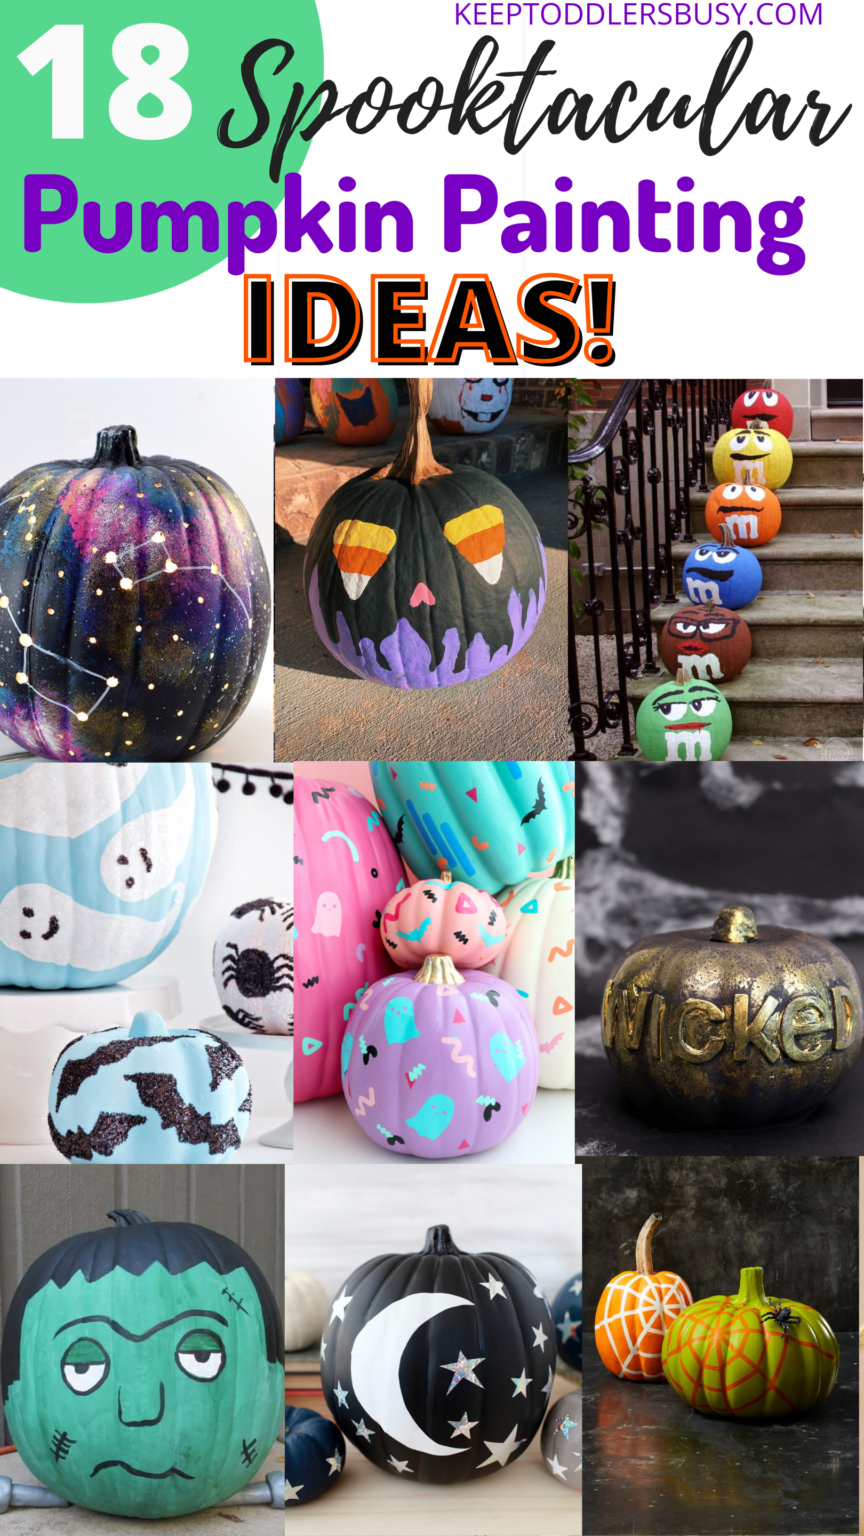 18 Amazing Pumpkin Painting Ideas That Will Blow Your Mind